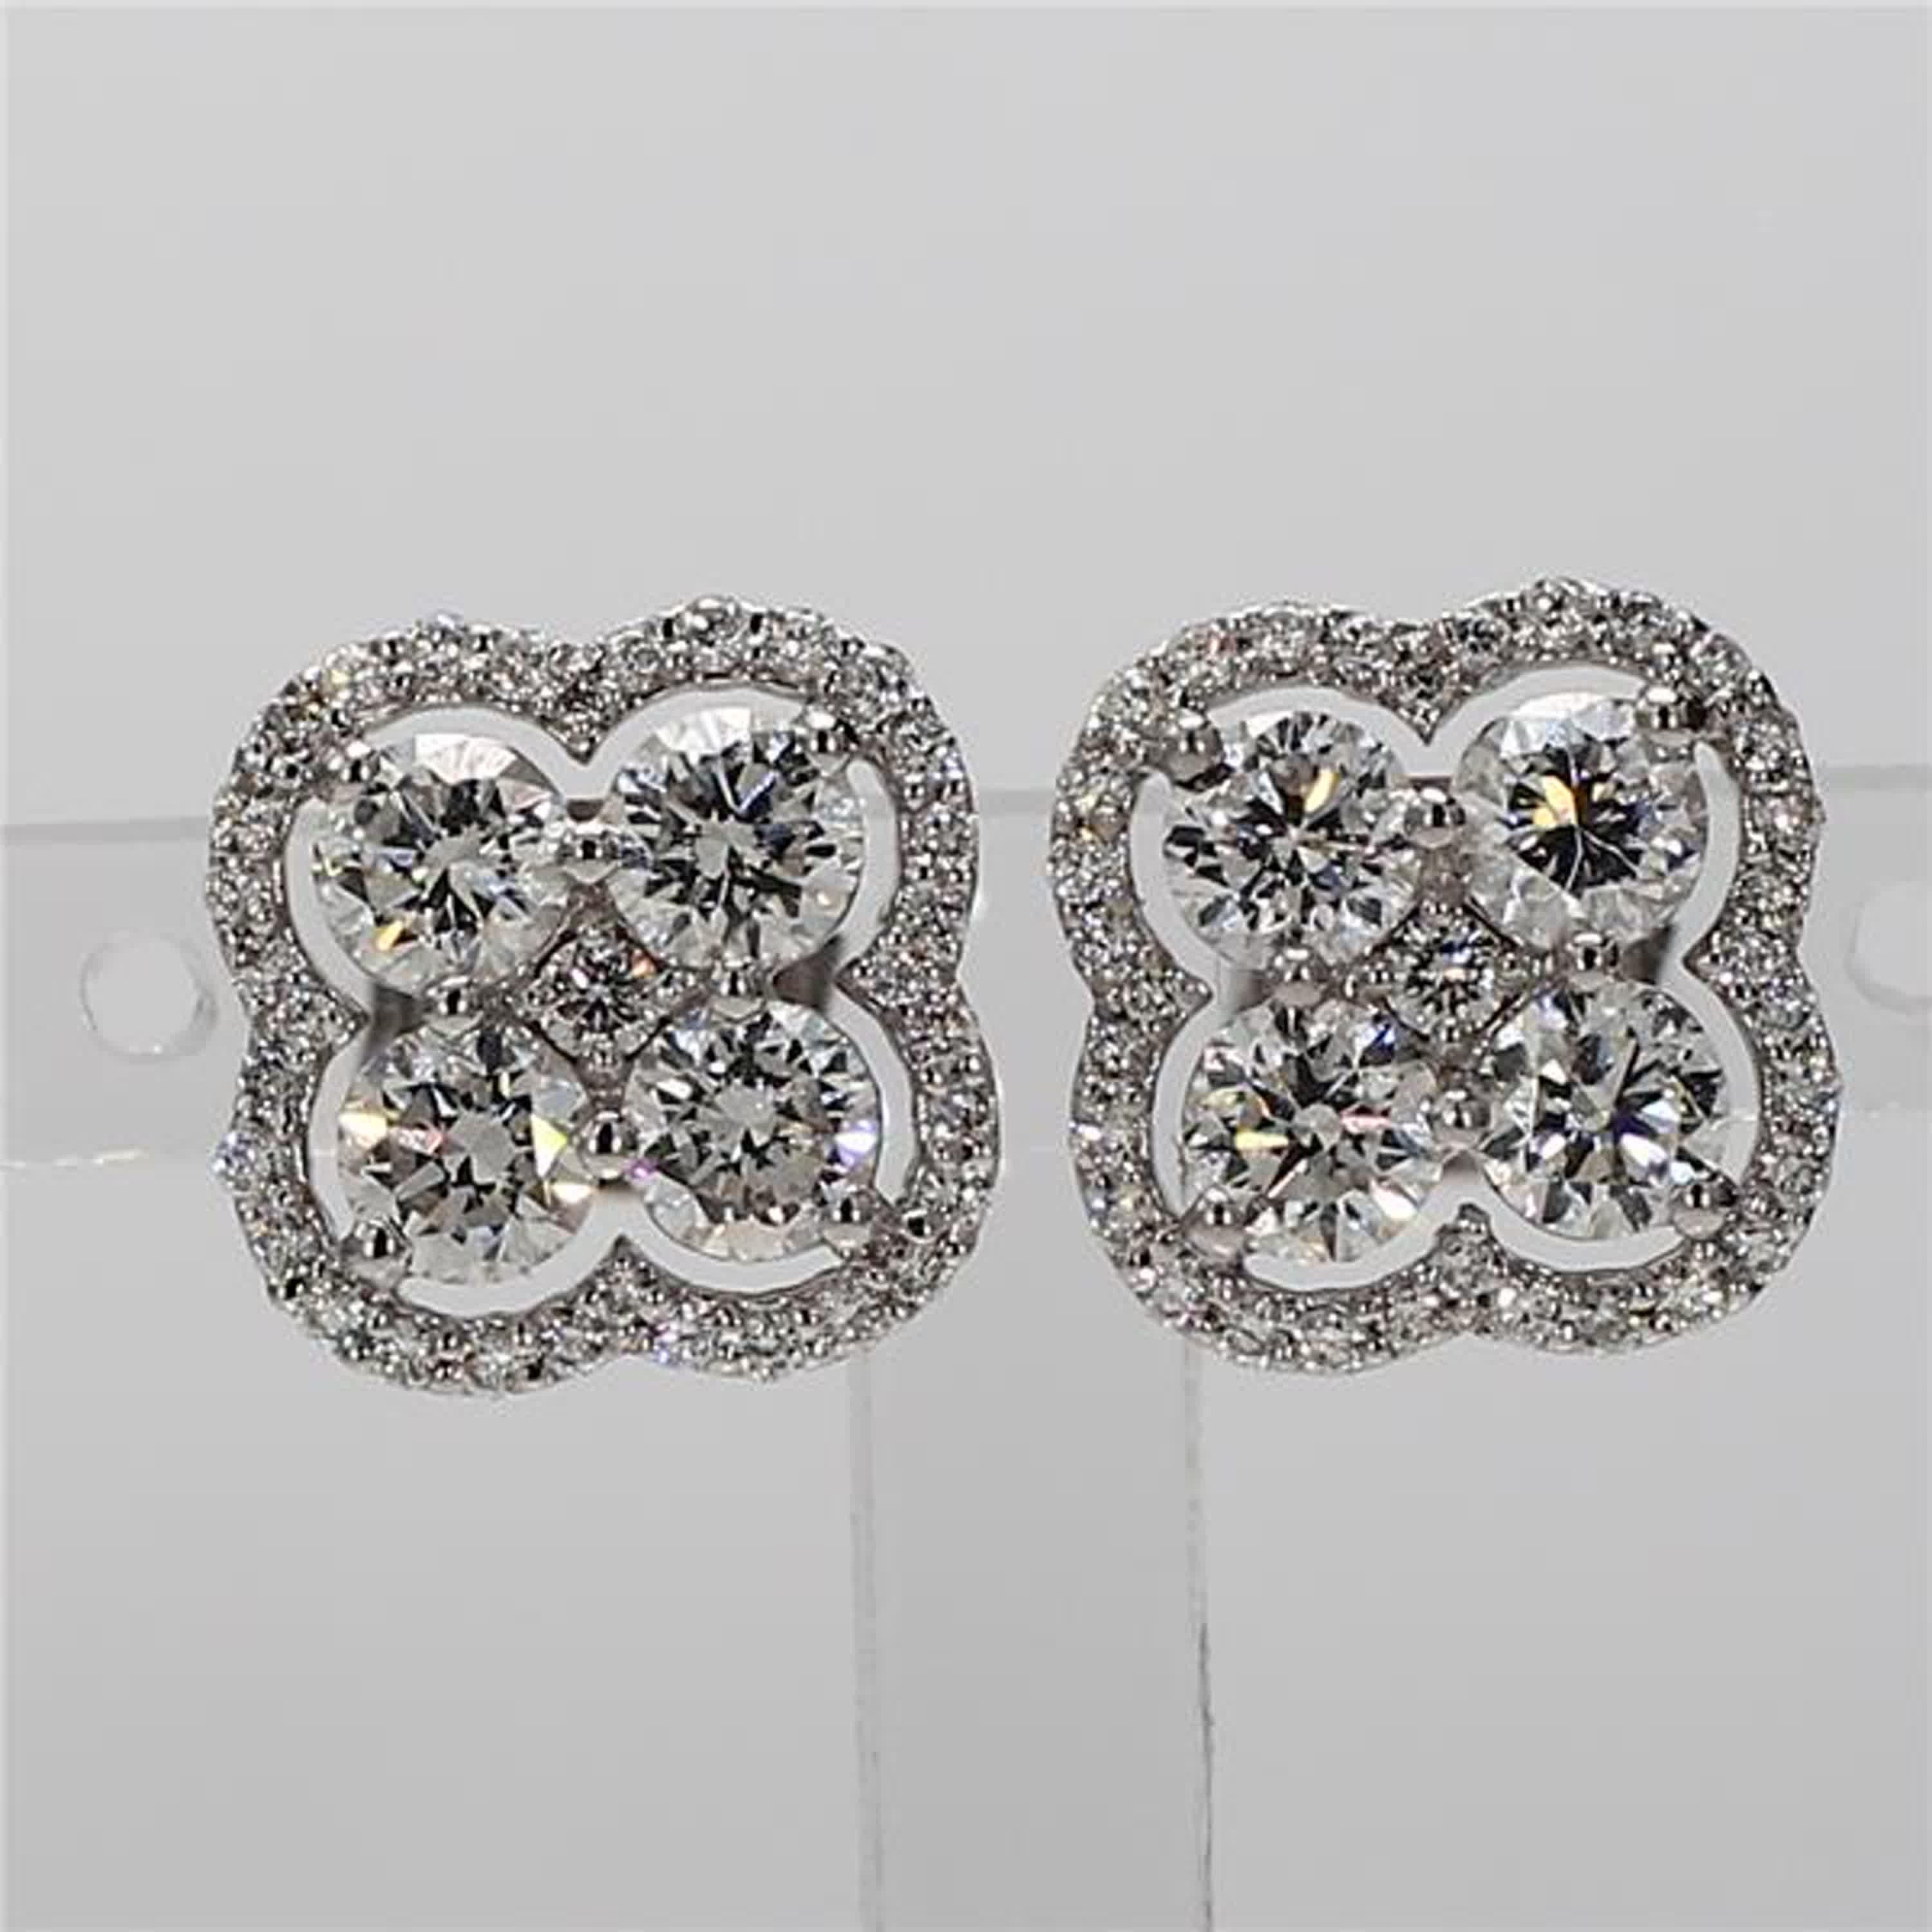 RareGemWorld's classic diamond earrings. Mounted in a beautiful 18K White Gold setting with big natural round cut white diamonds surrounded by small natural round white diamond melee. These earrings are guaranteed to impress and enhance your